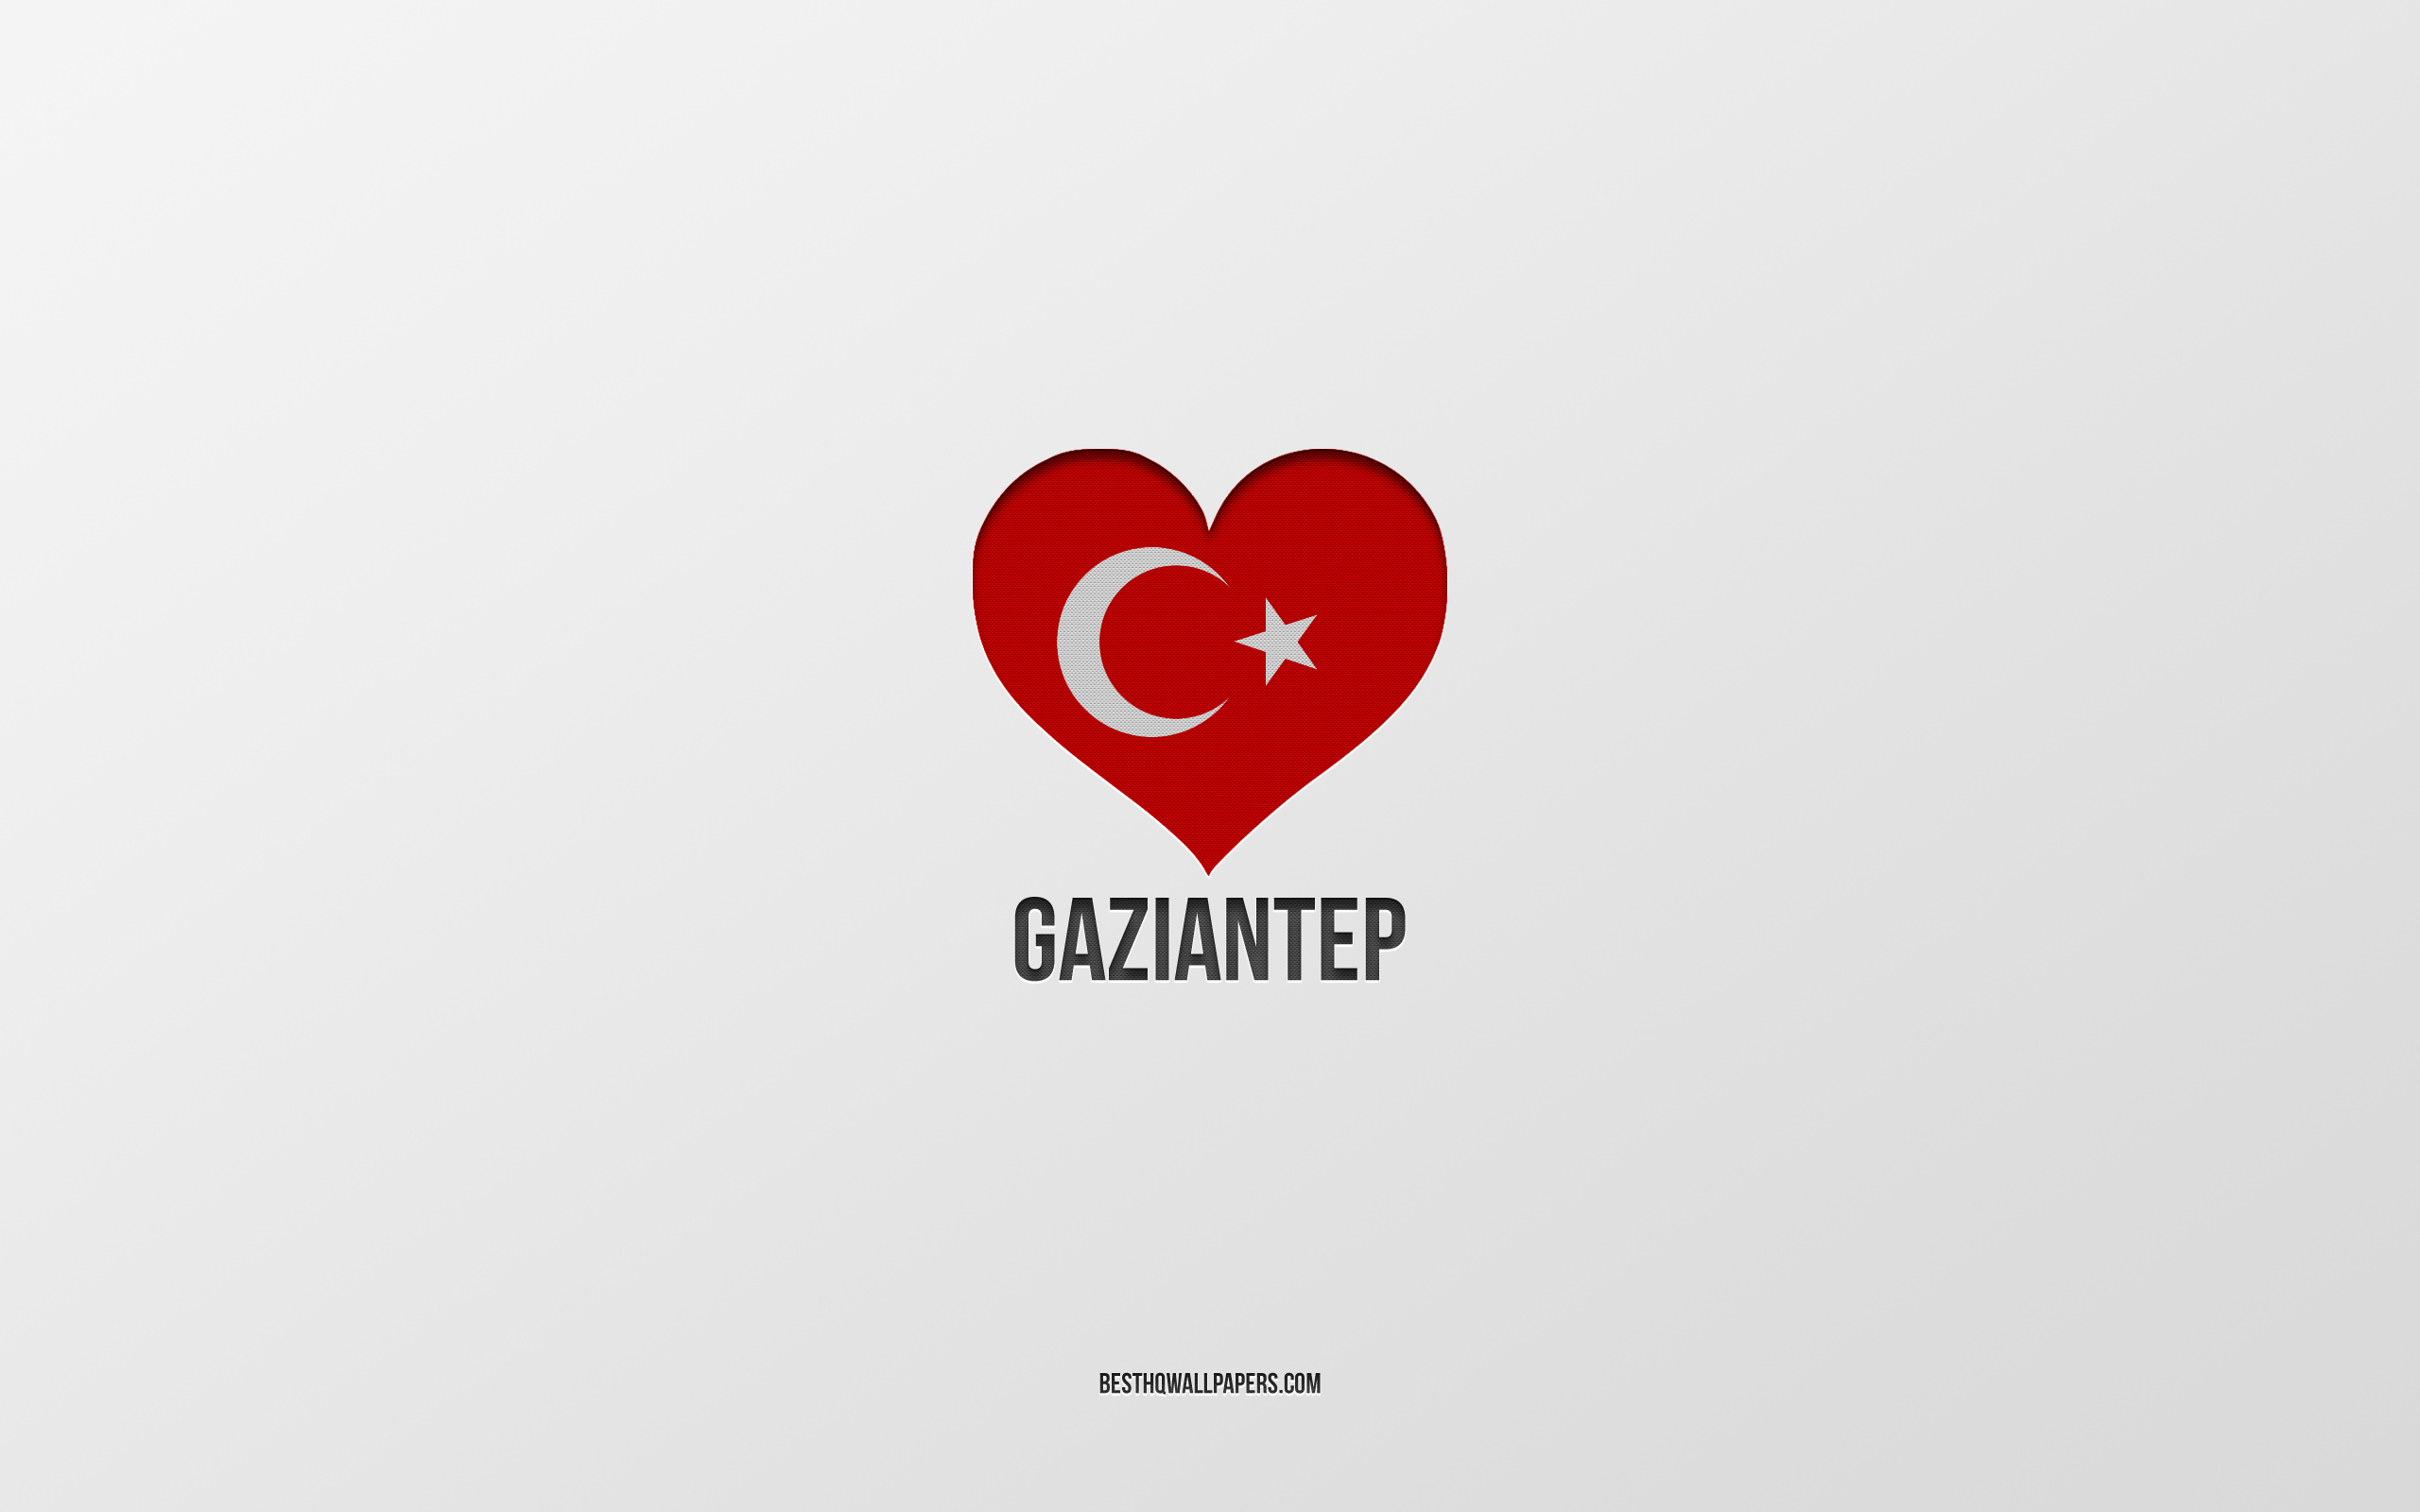 Download wallpaper I Love Gaziantep, Turkish cities, gray background, Gaziantep, Turkey, Turkish flag heart, favorite cities, Love Gaziantep for desktop with resolution 2560x1600. High Quality HD picture wallpaper